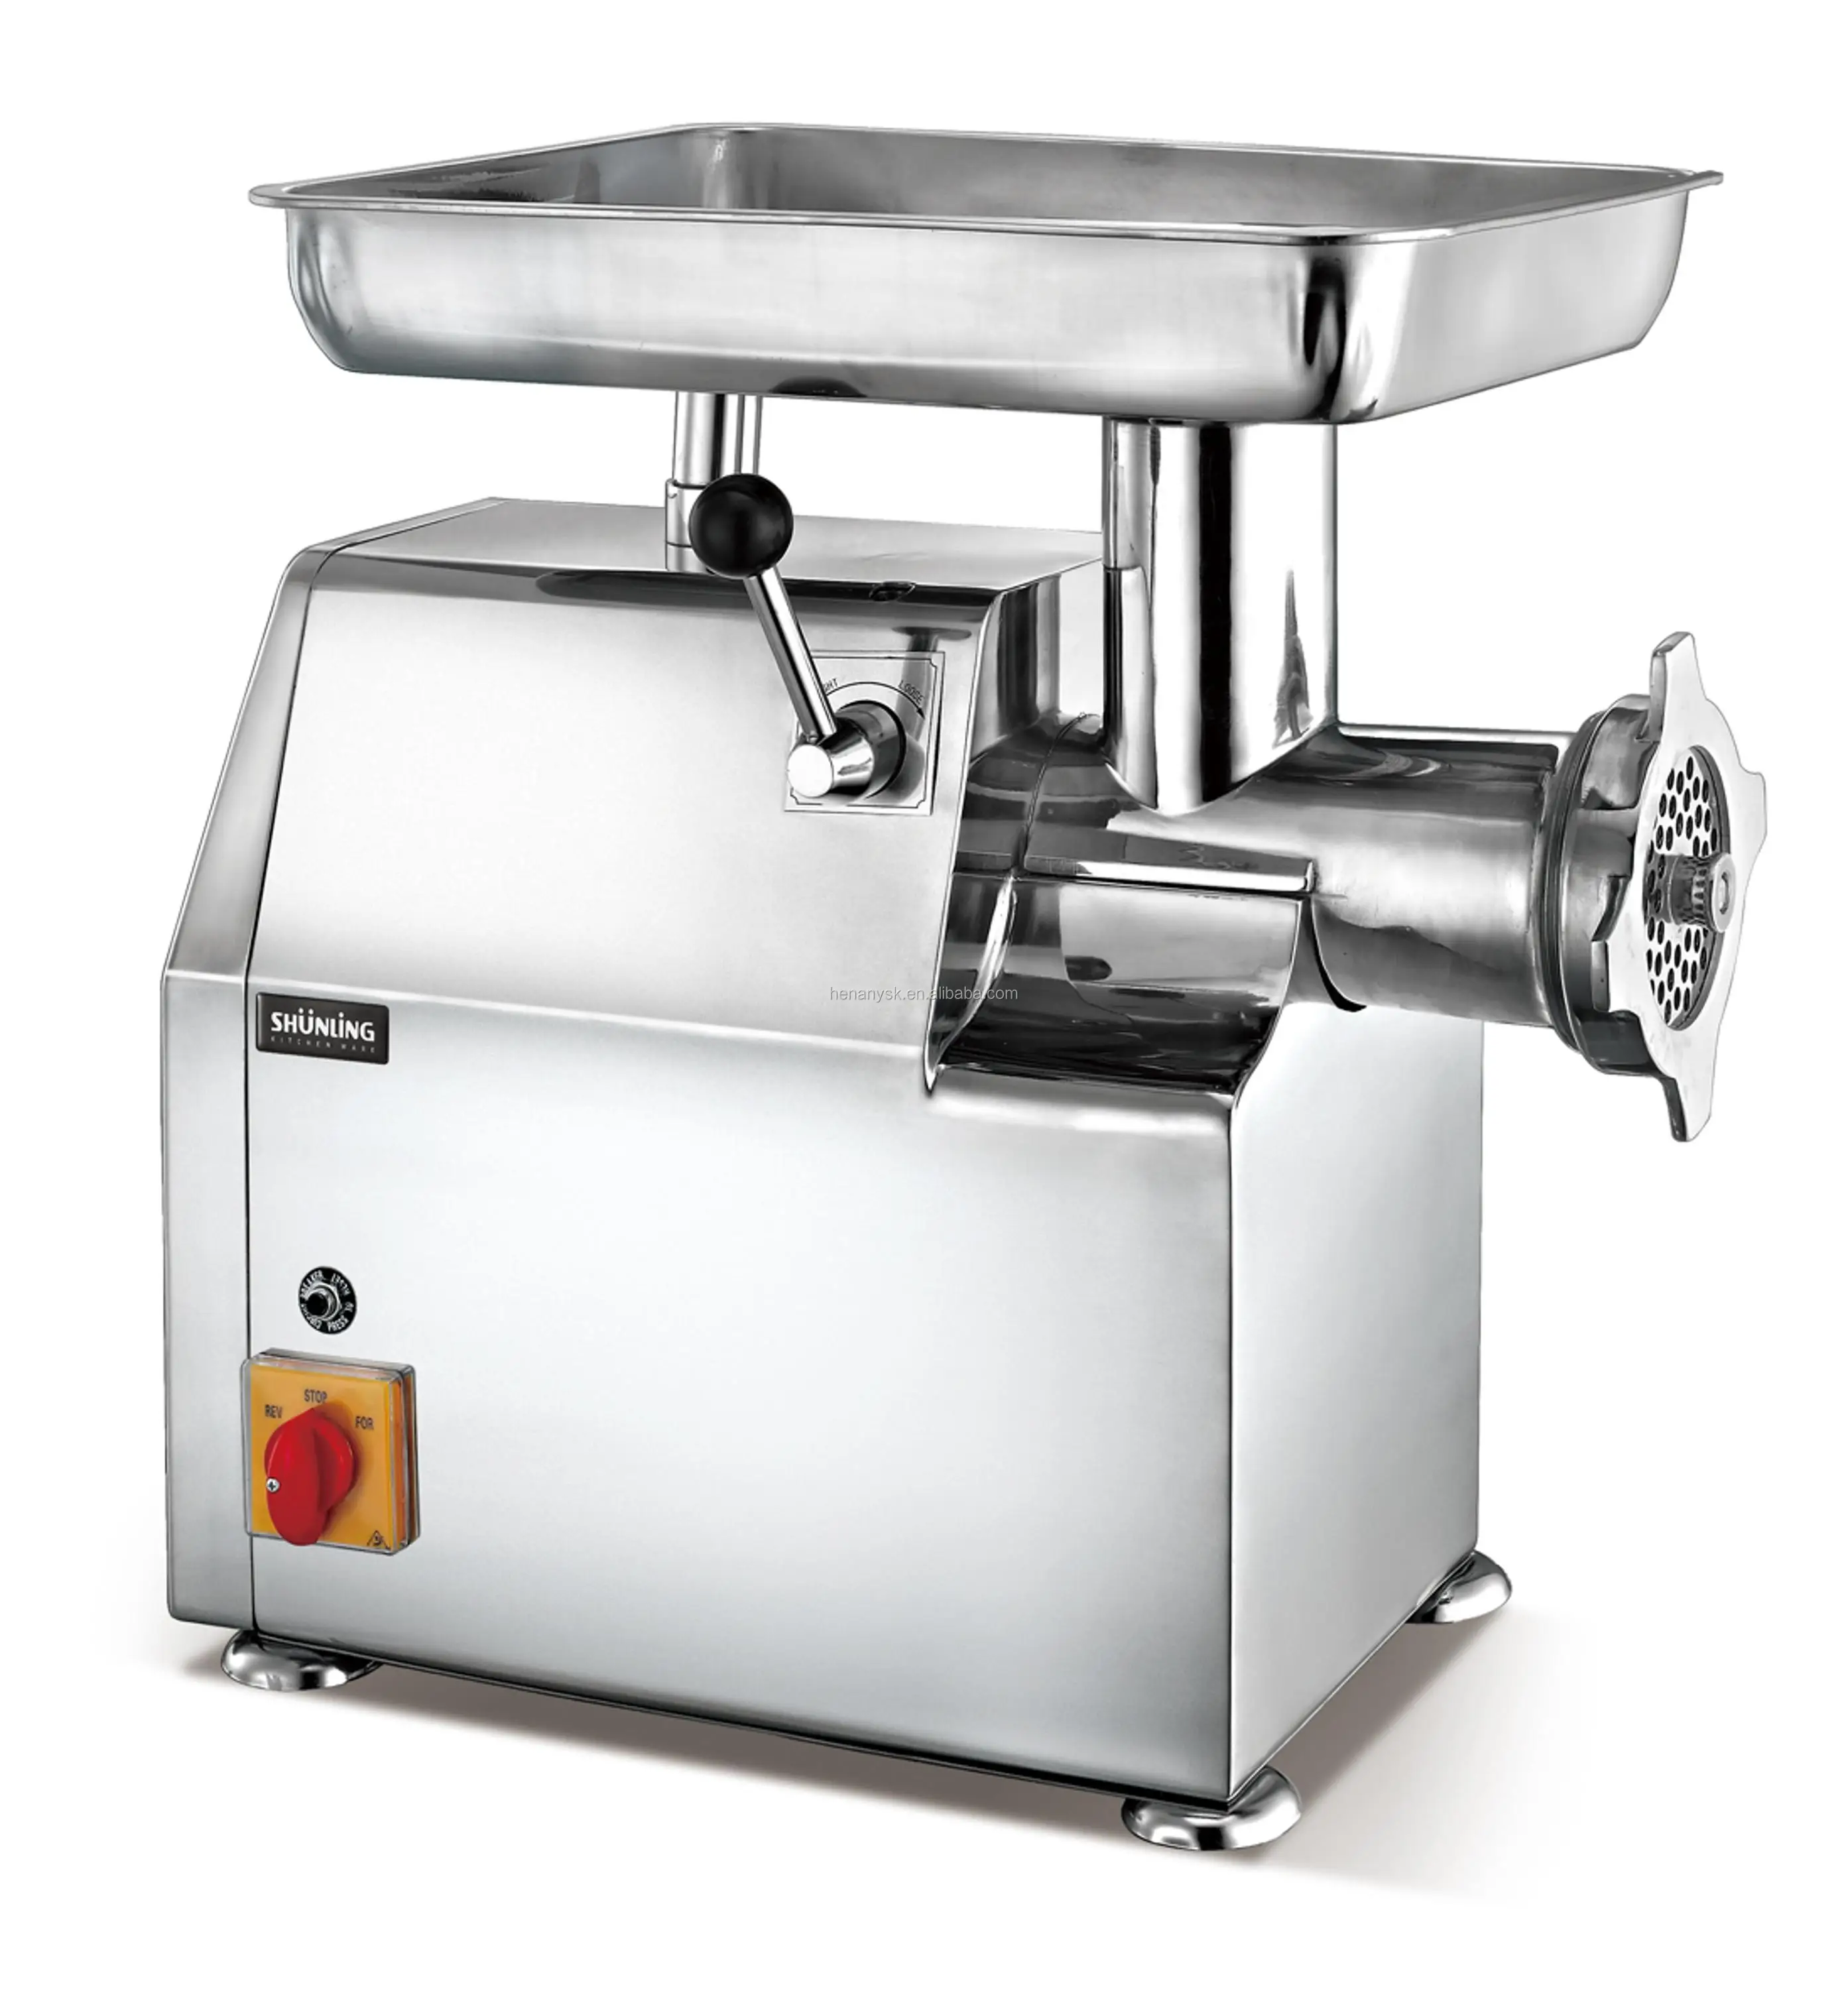 Quality Stainless Steel Commercial High-Efficiency Energy-Saving Electric Meat Grinder